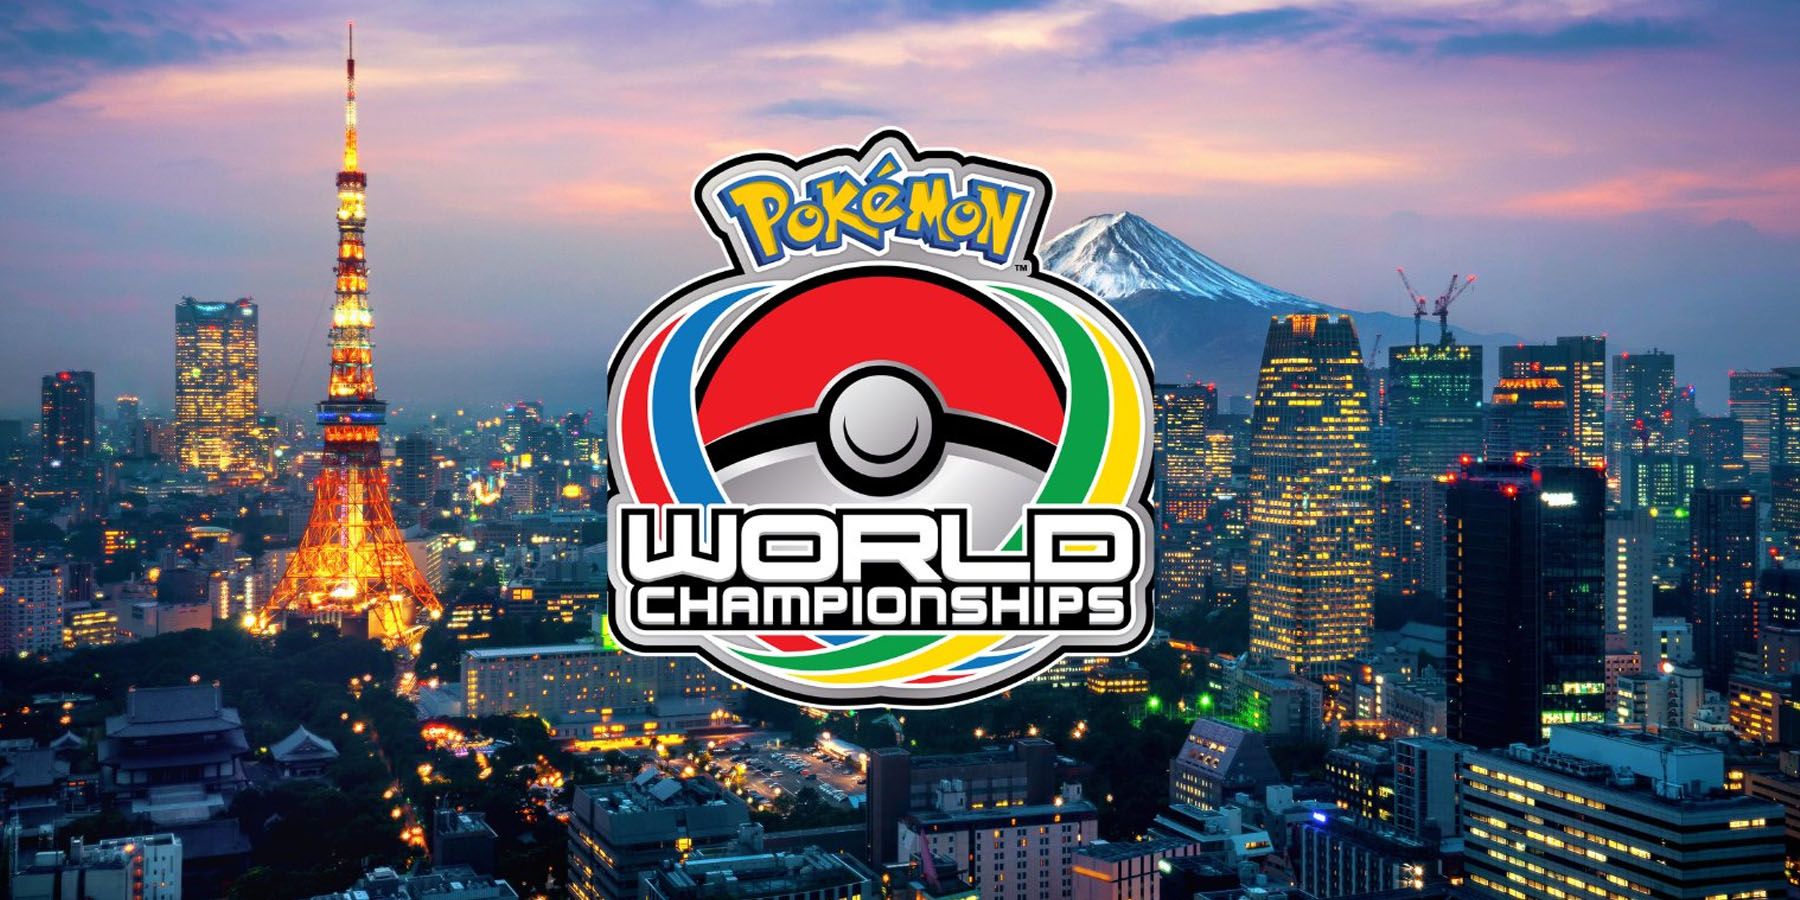 An image of the Pokemon World Championships logo set against a city at night.